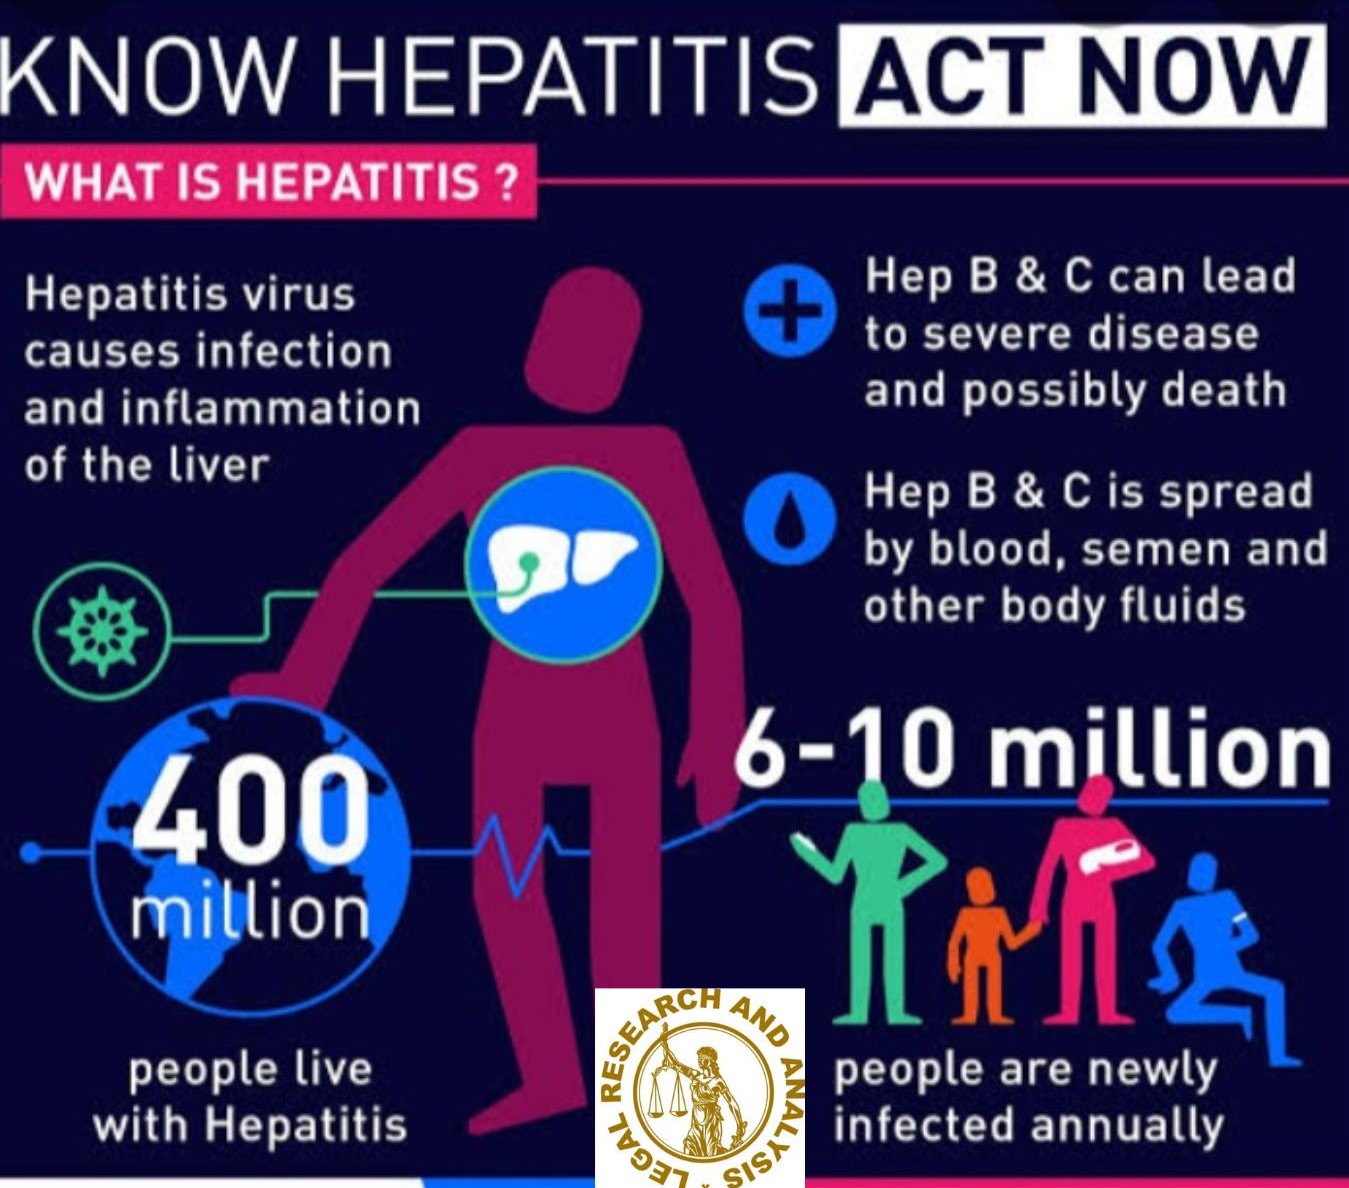 World Hepatitis Day,2022: Significance, Theme and Most people are unaware of the following facts: